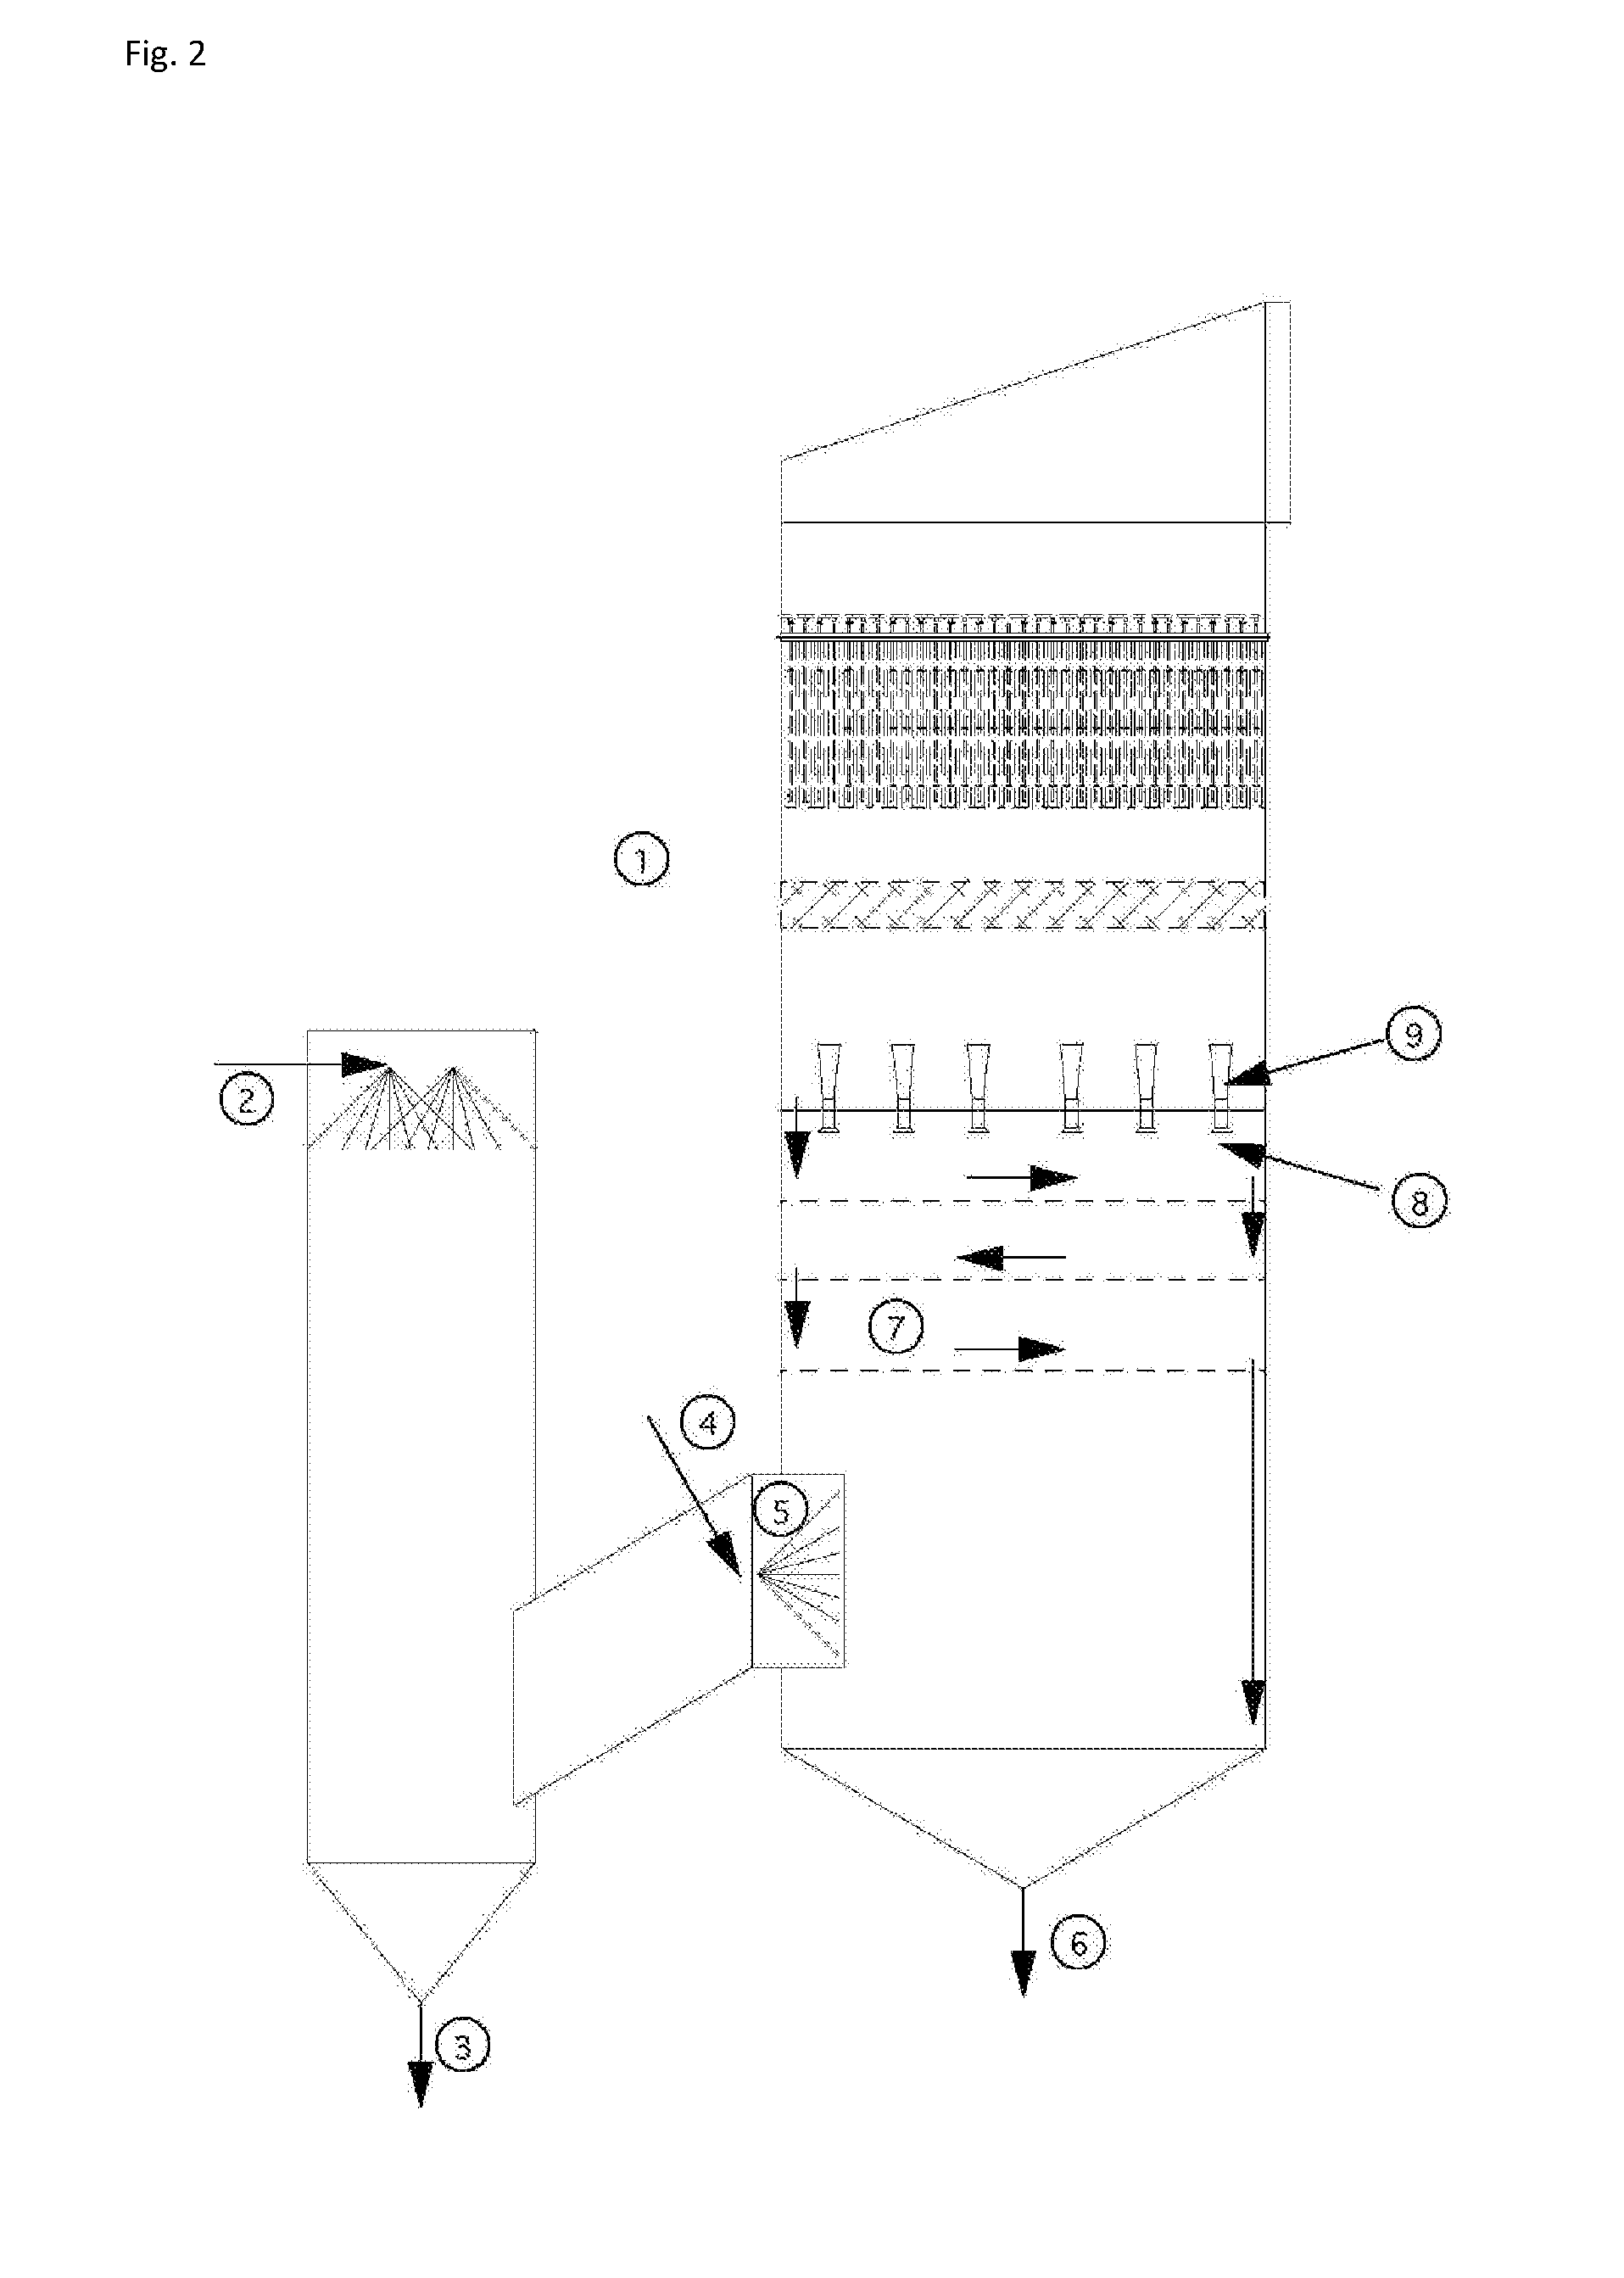 An apparatus and method for particulate capture from gas streams and a method of removing soluble particulate from a gas